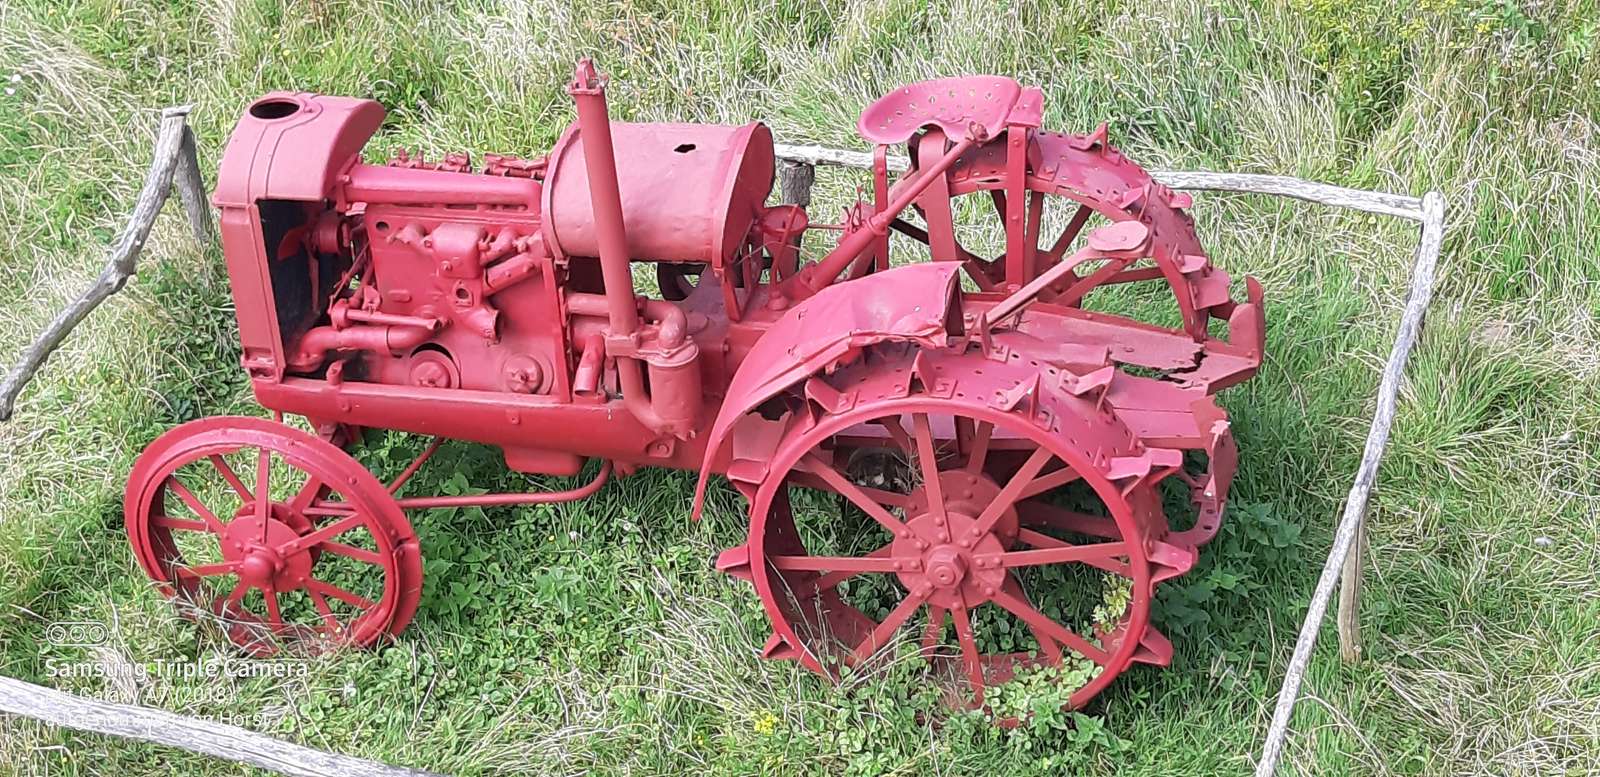 An old tractor online puzzle